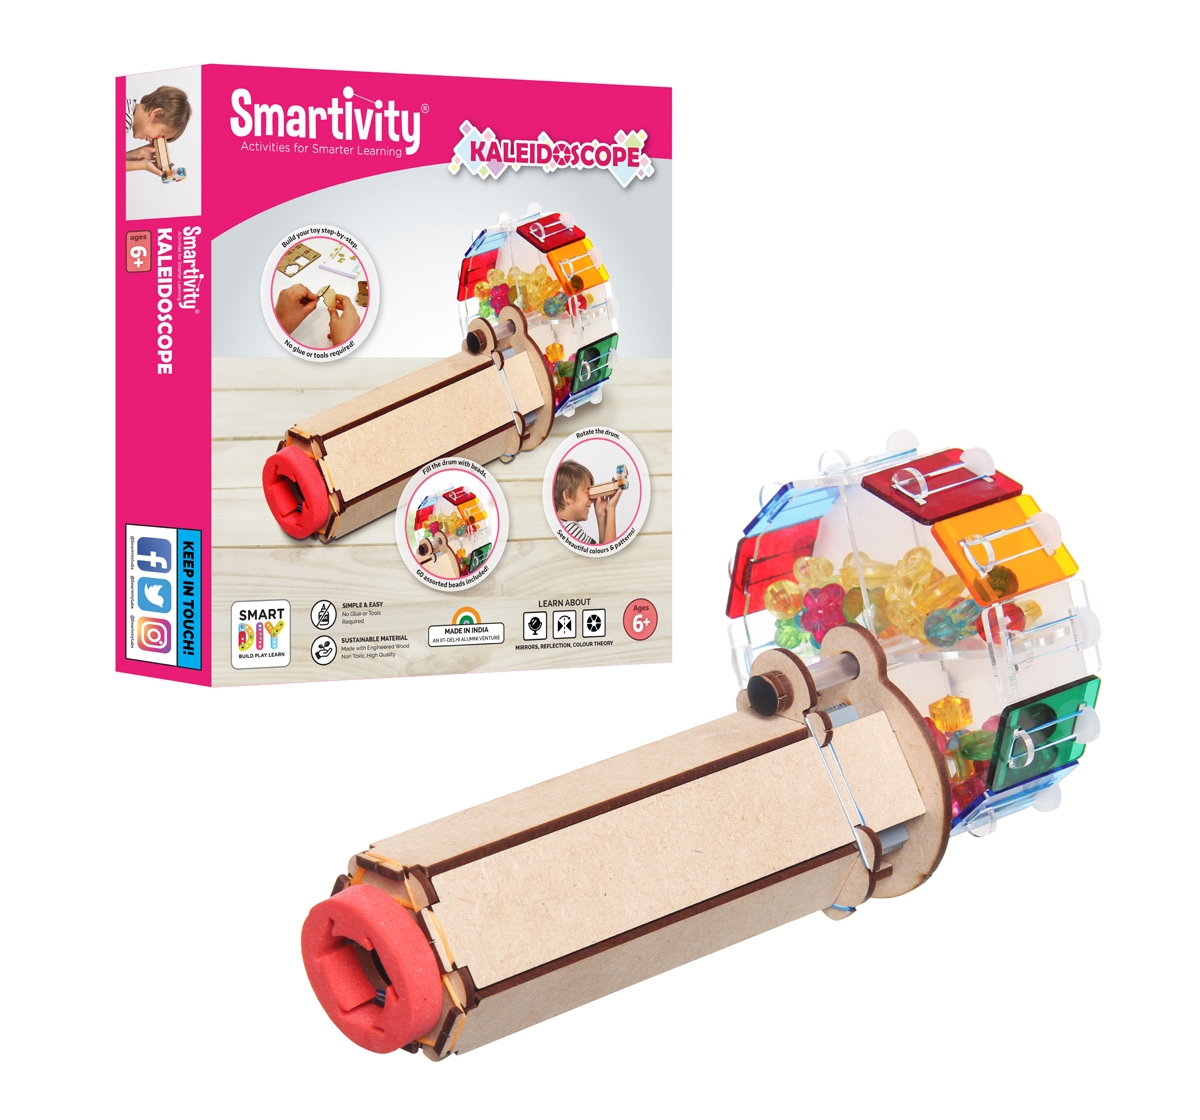 Smartivity | Smartivity Fantastic Optics Kaleidoscope:  Stem, Learning, Educational and Construction Activity Toy Gift for Kids age 6Y+ (Multi-Color) 